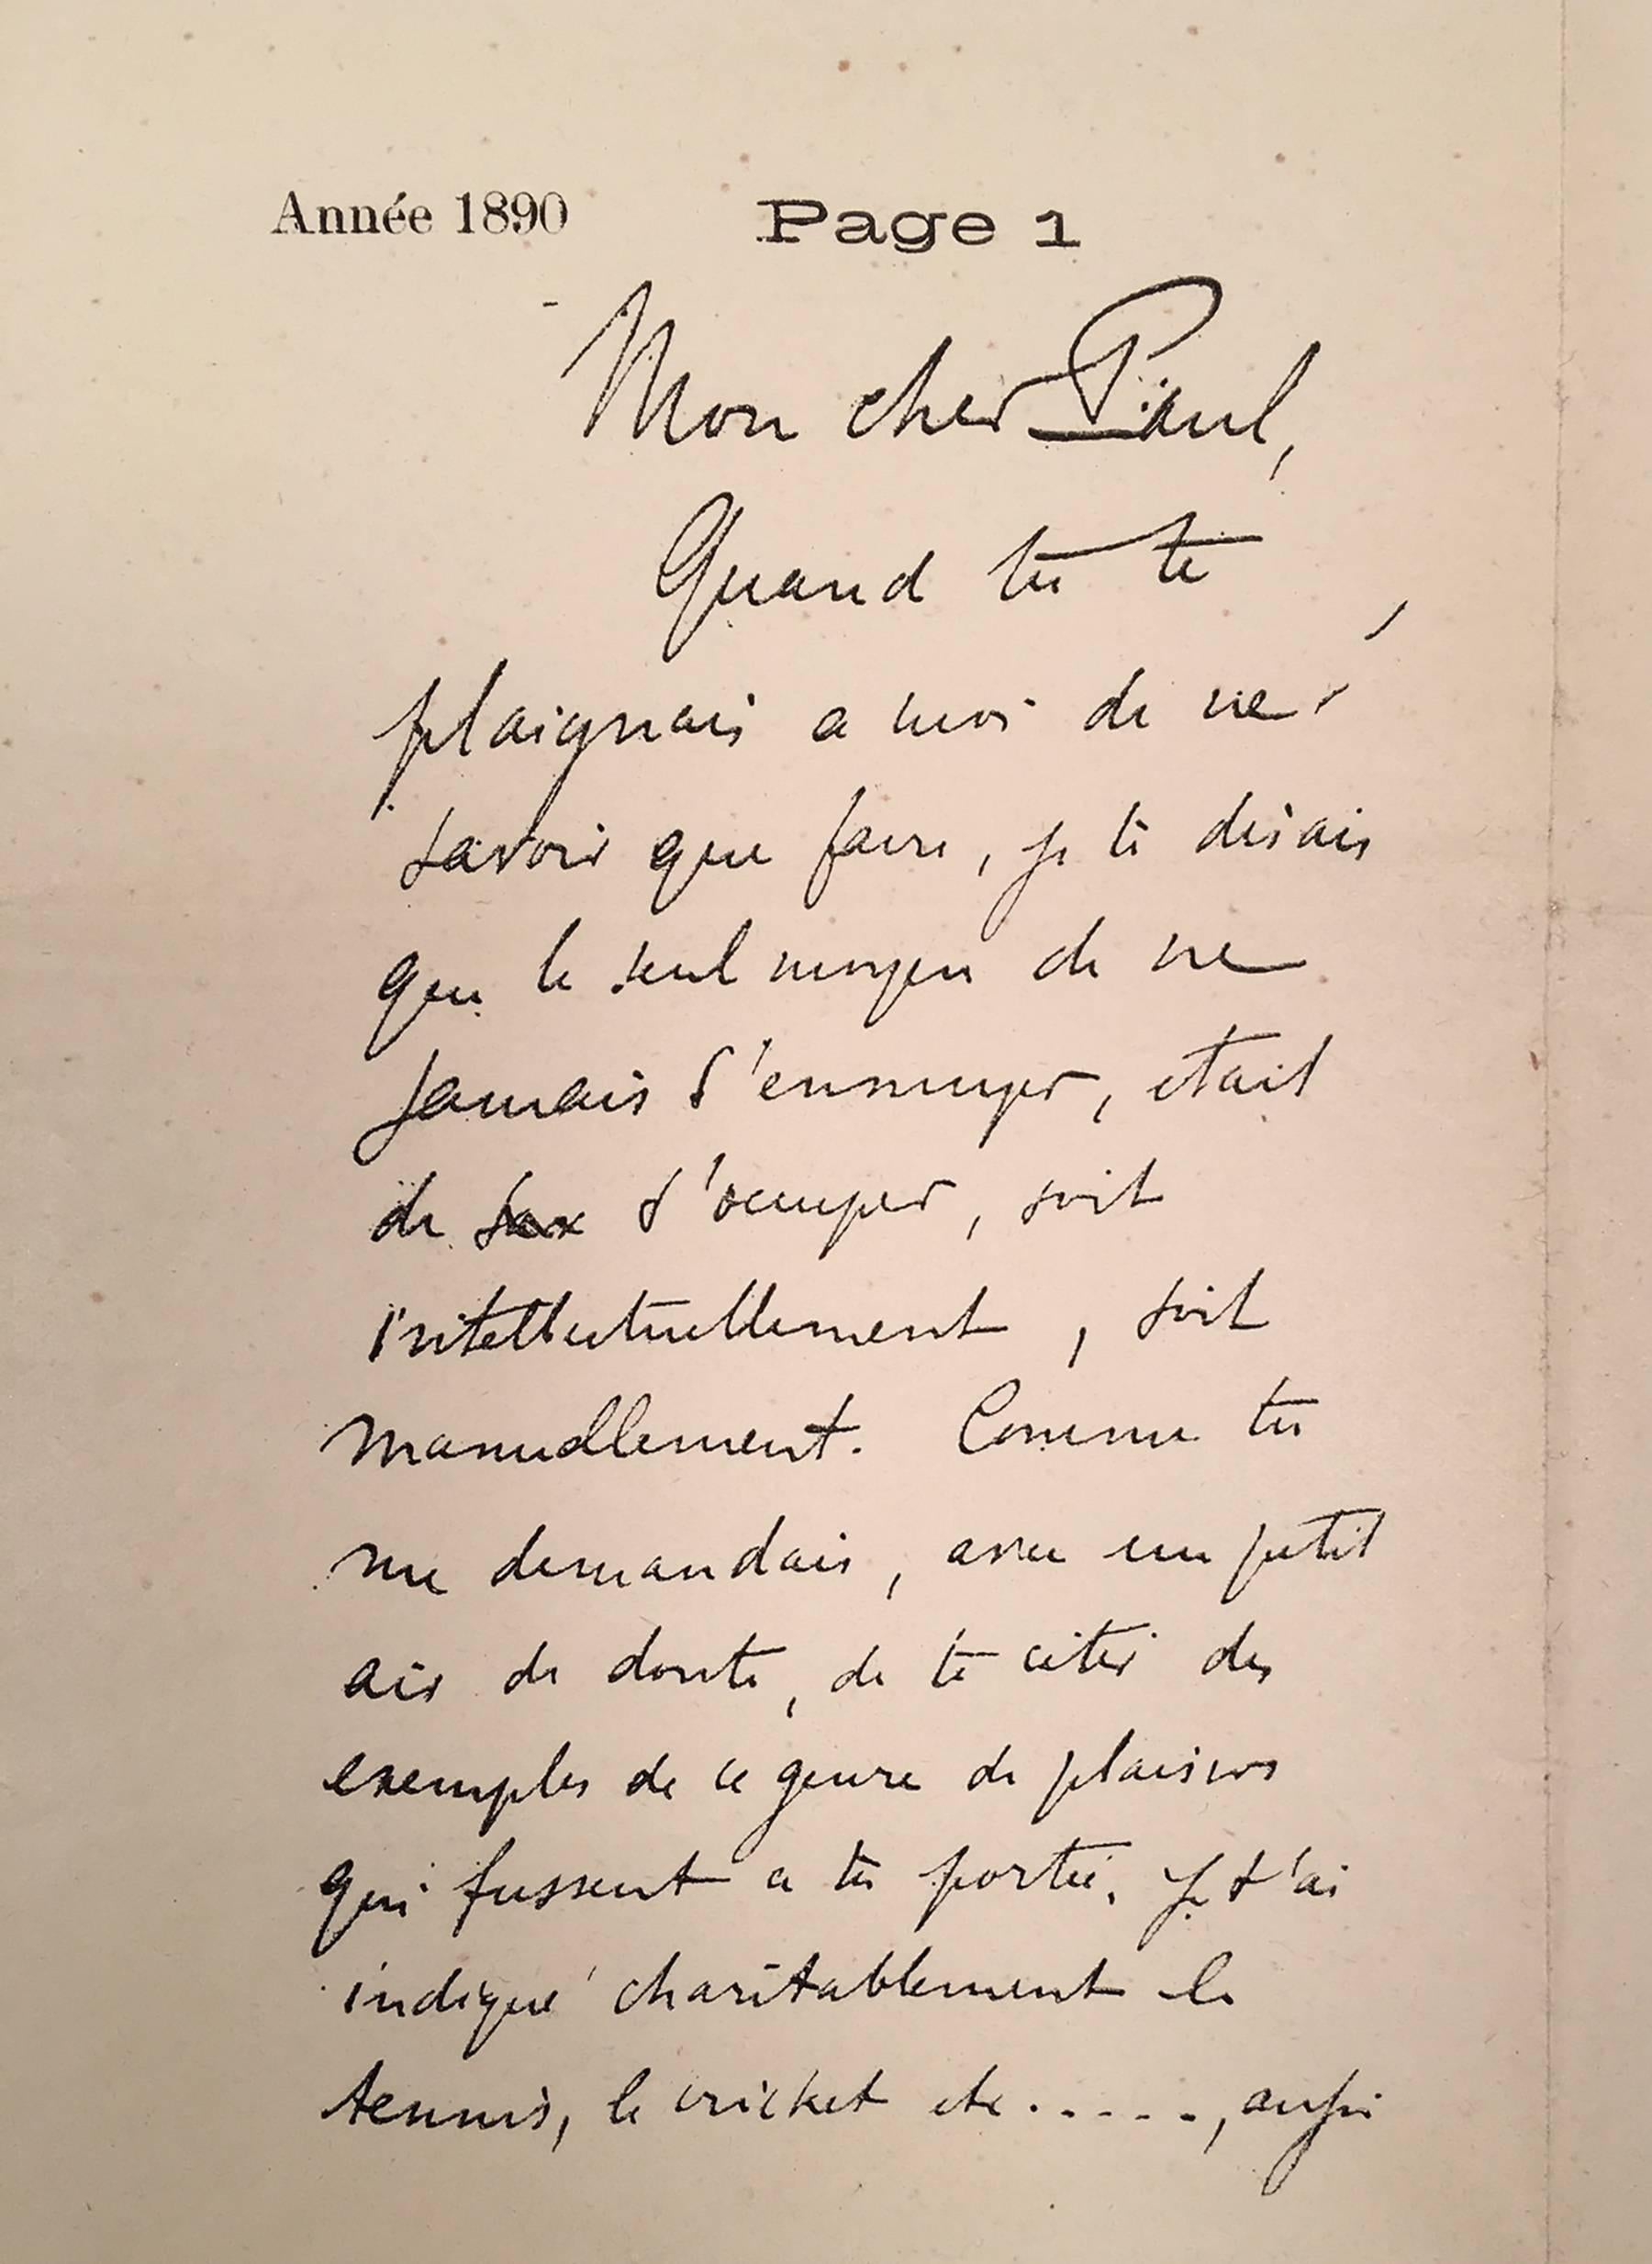 A Key to the Dreyfus Affaire (La Clé de L'Affaire Dreyfus).  Broadside placard printed y Paul Lemaire showing the forged documents and handwriting samples that played a key role in convicting and later exonerating Captain Alfred Dreyfus of high